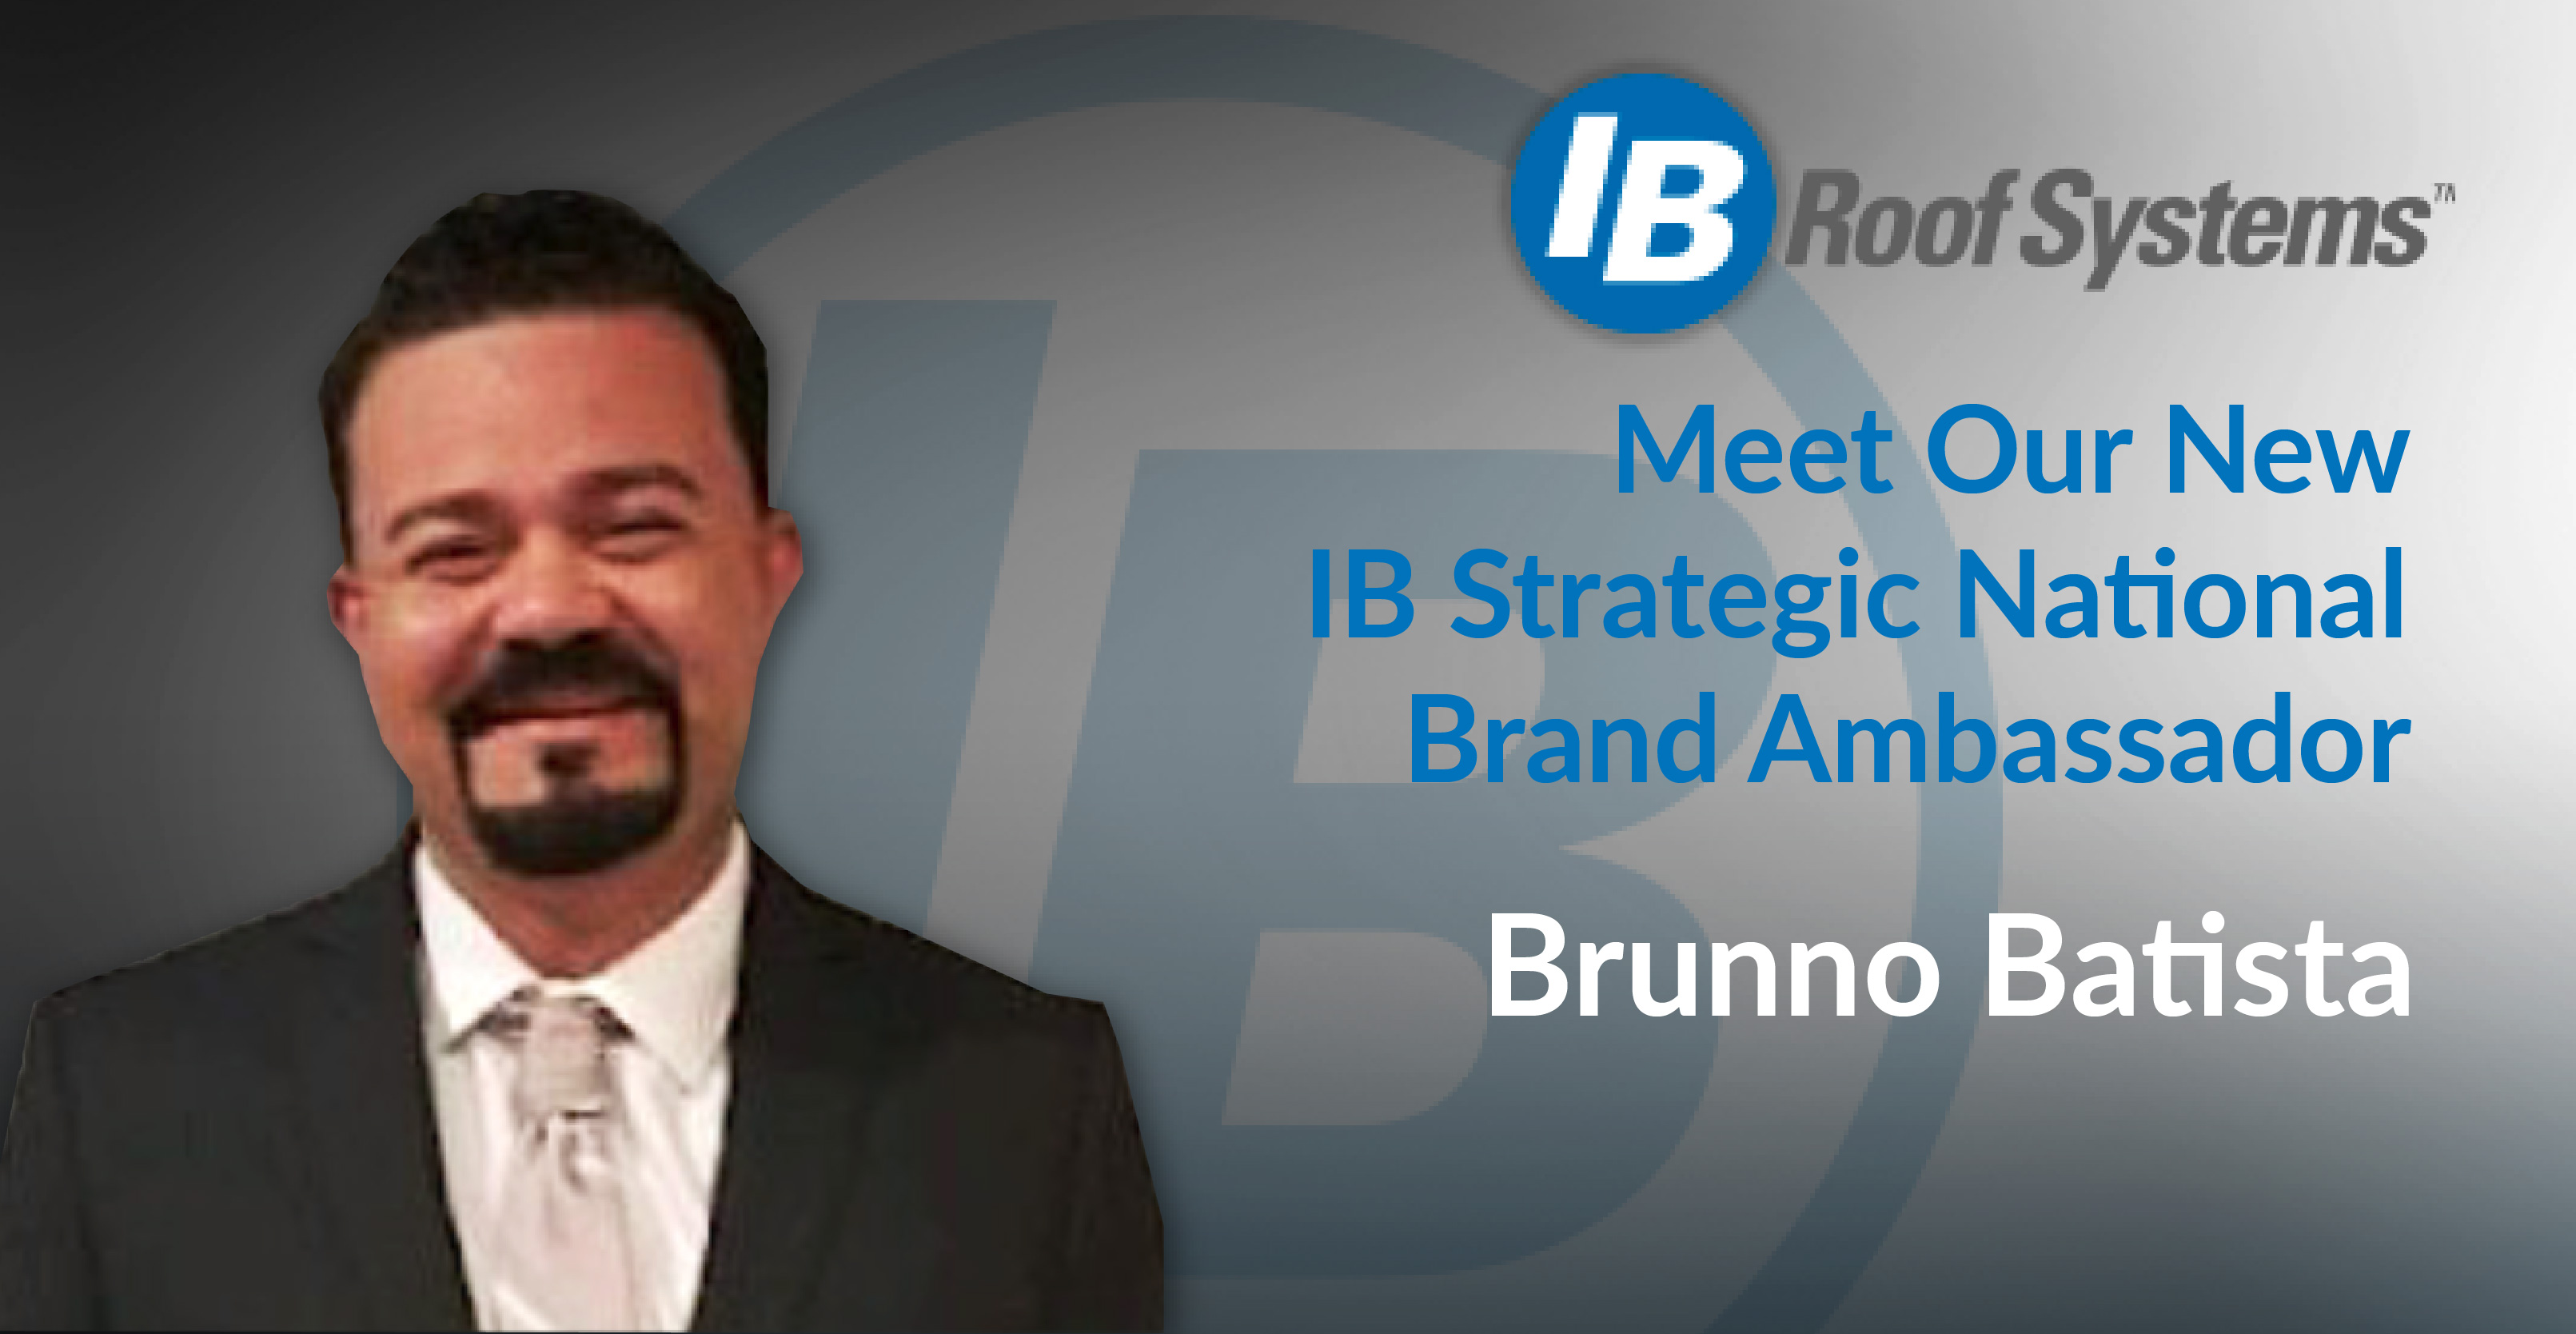 Welcome Brunno to Team IB!